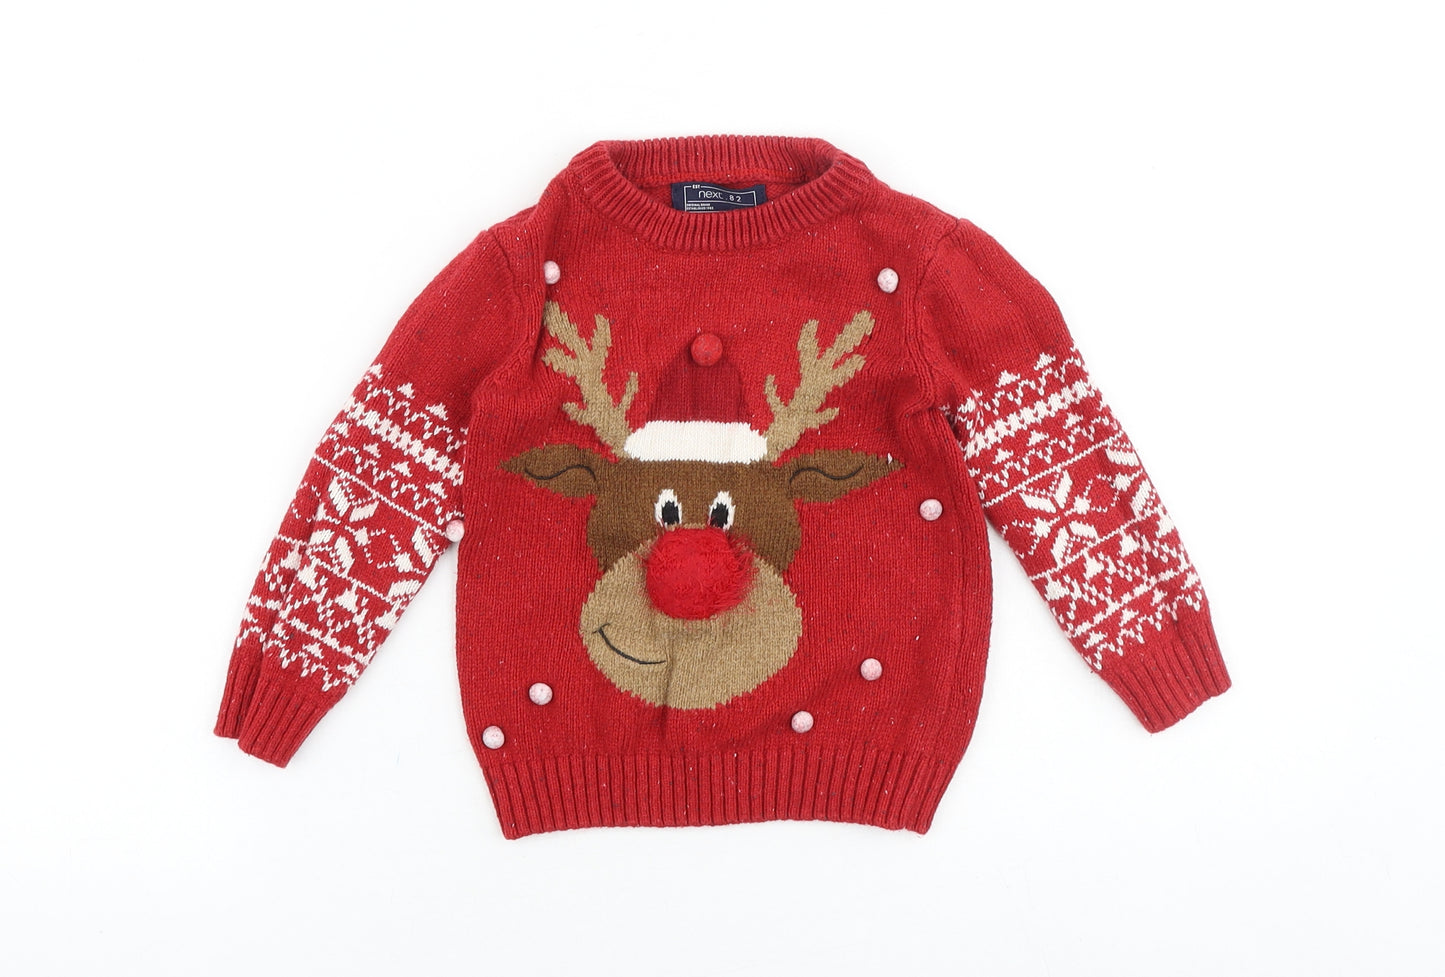 NEXT Boys Red Round Neck Fair Isle Acrylic Pullover Jumper Size 3 Years Pullover - Christmas Rudolph